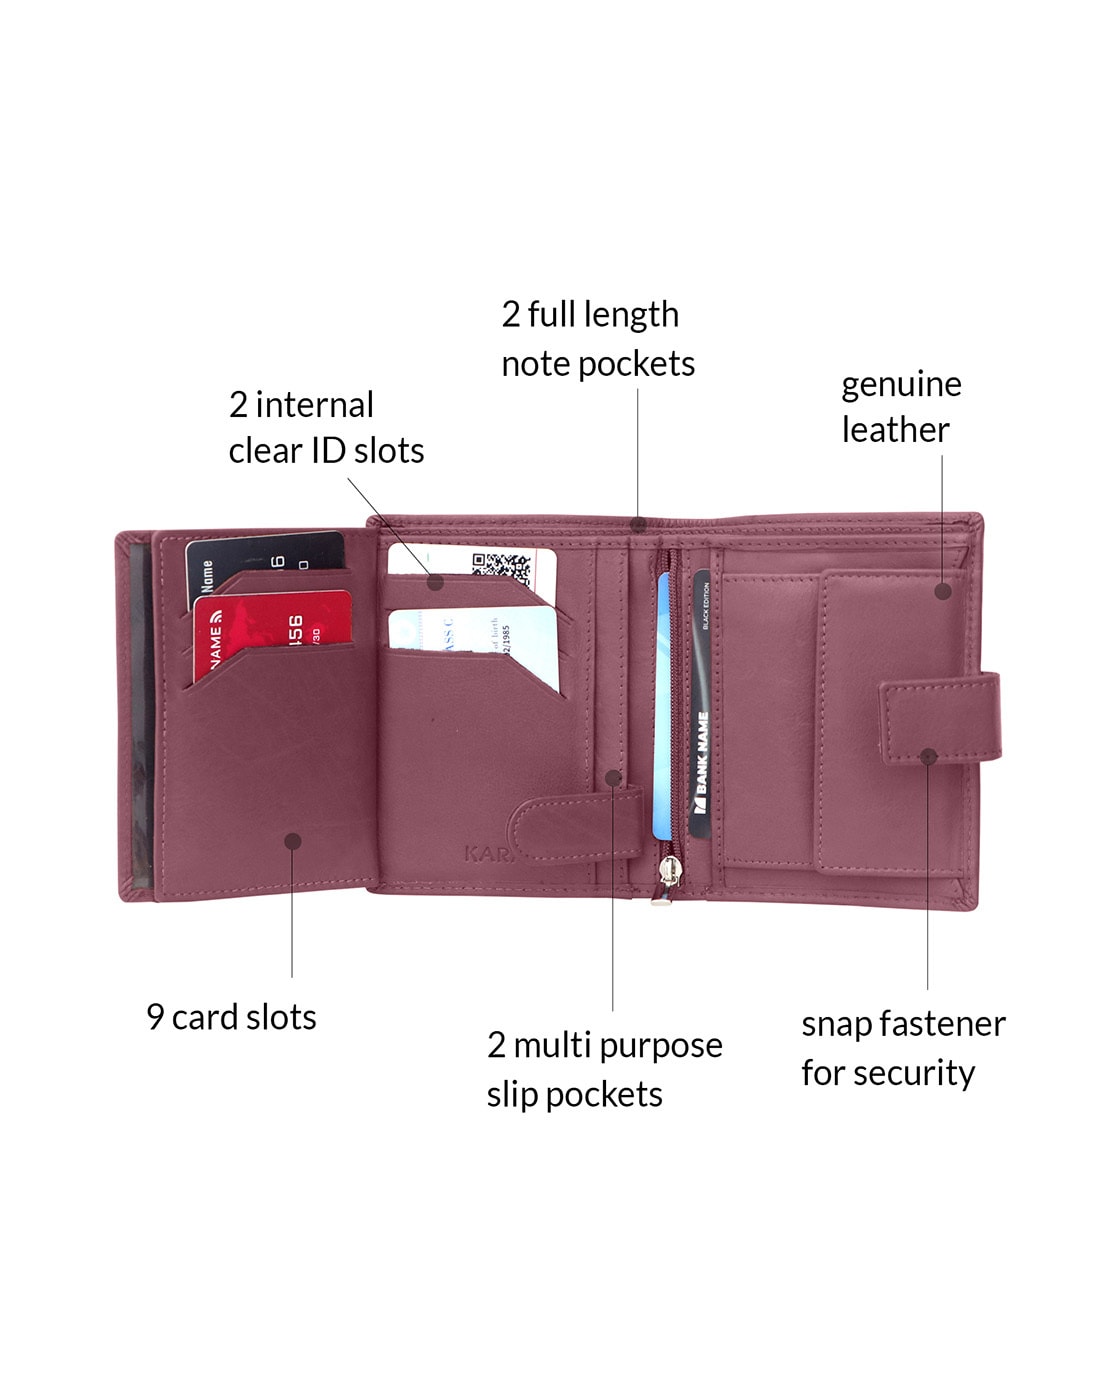 Buy LMN Genuine Leather Violet Women's Wallet 9 Card Slots at Amazon.in